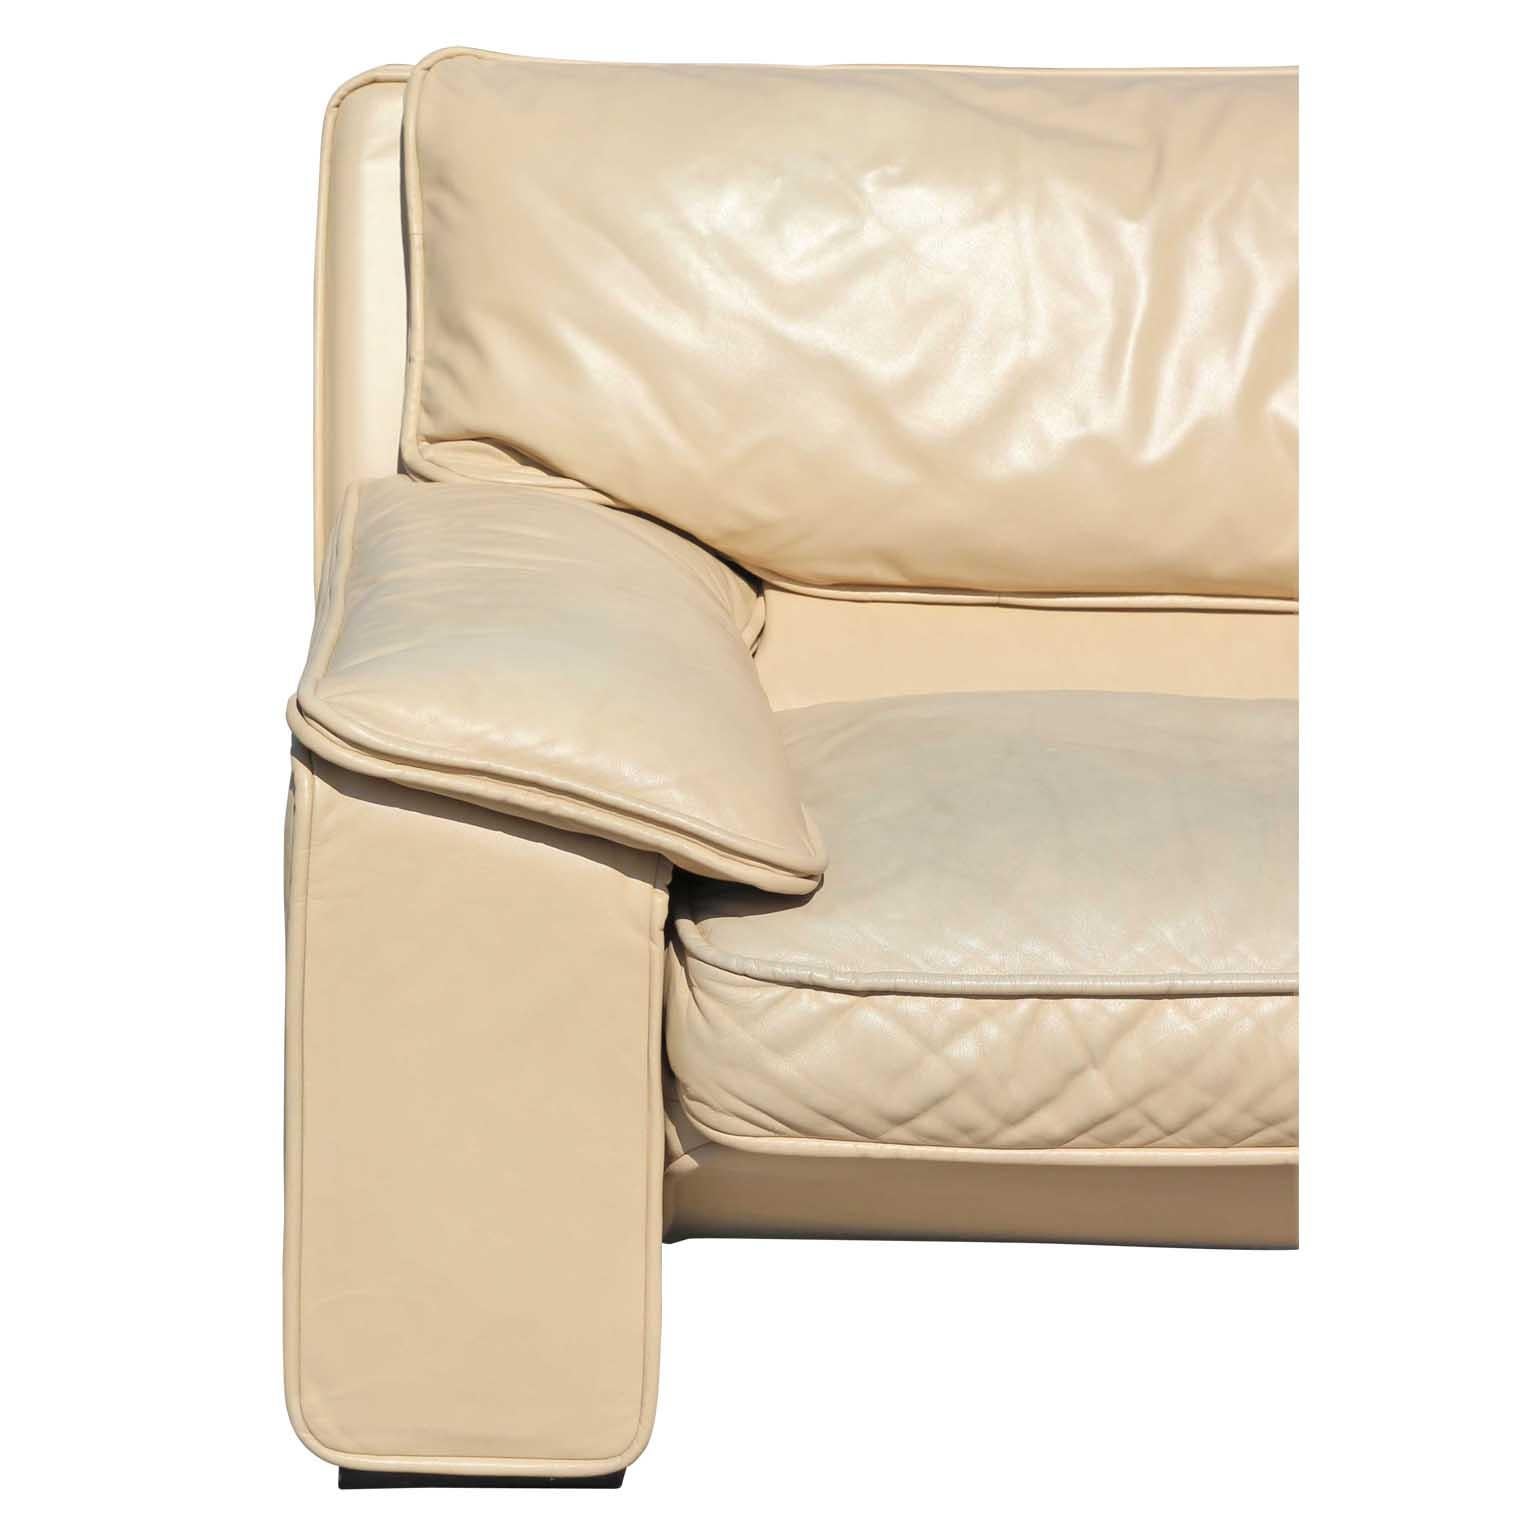 cream leather couch